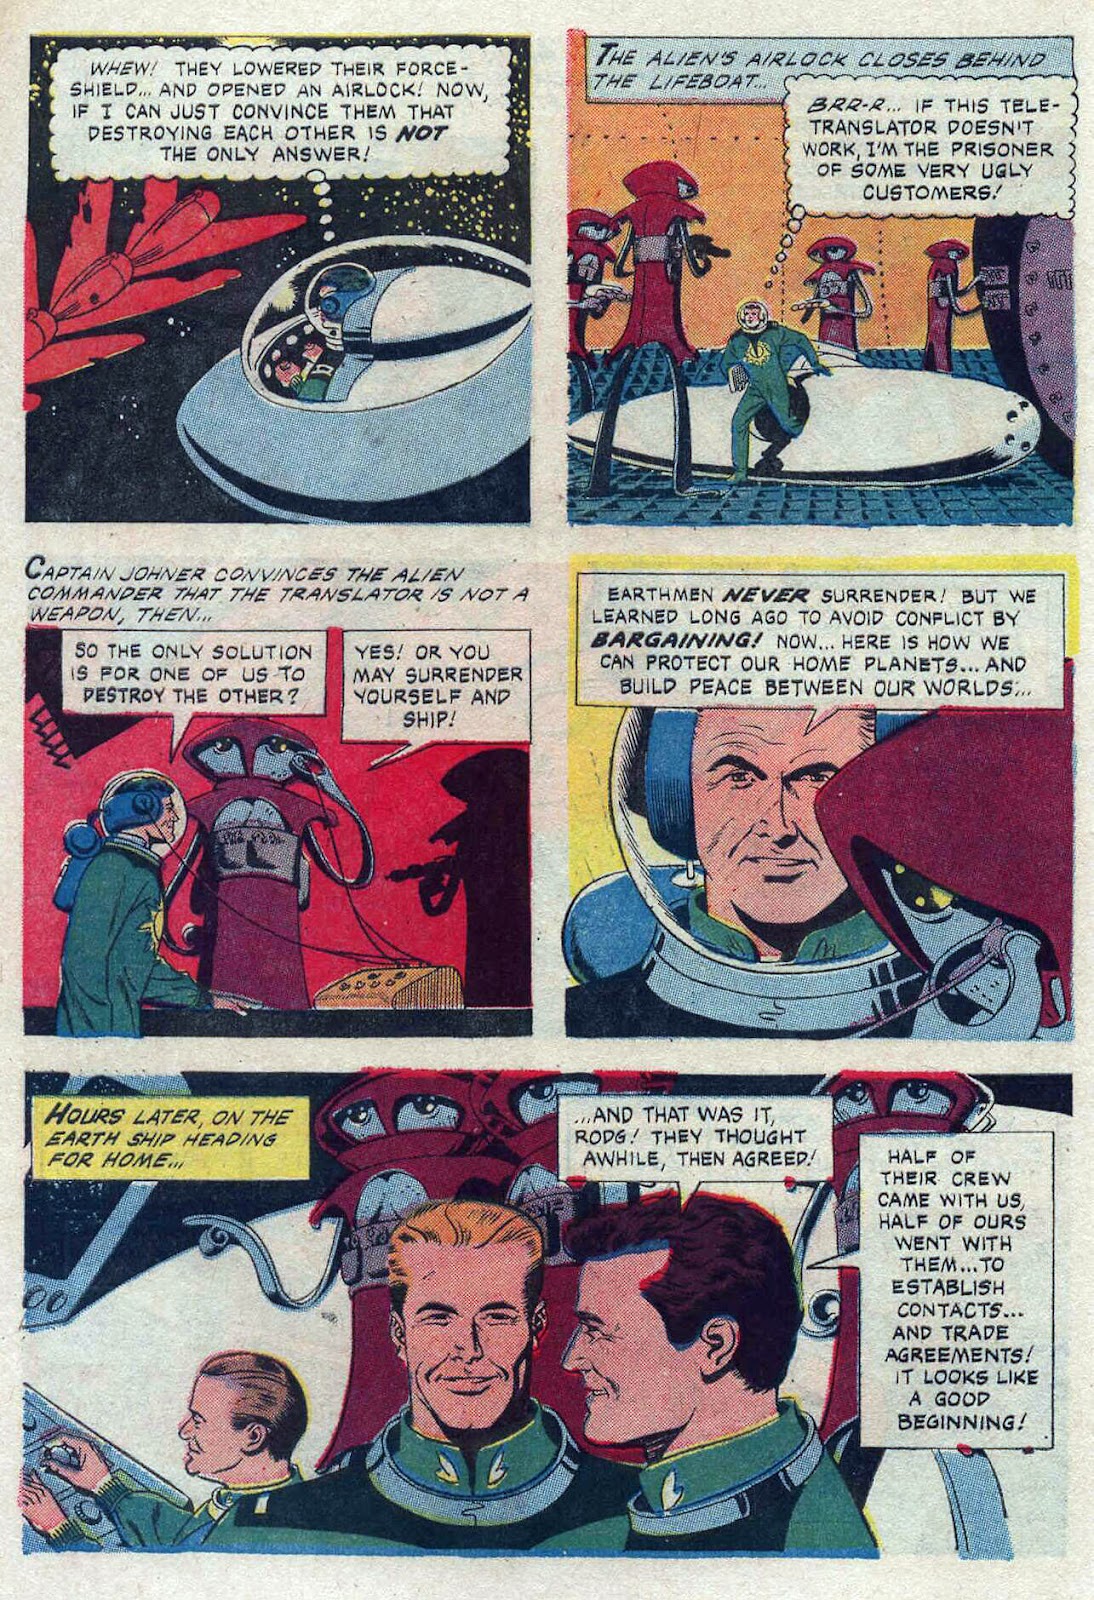 Captain Johner & the Aliens issue 1 - Page 6